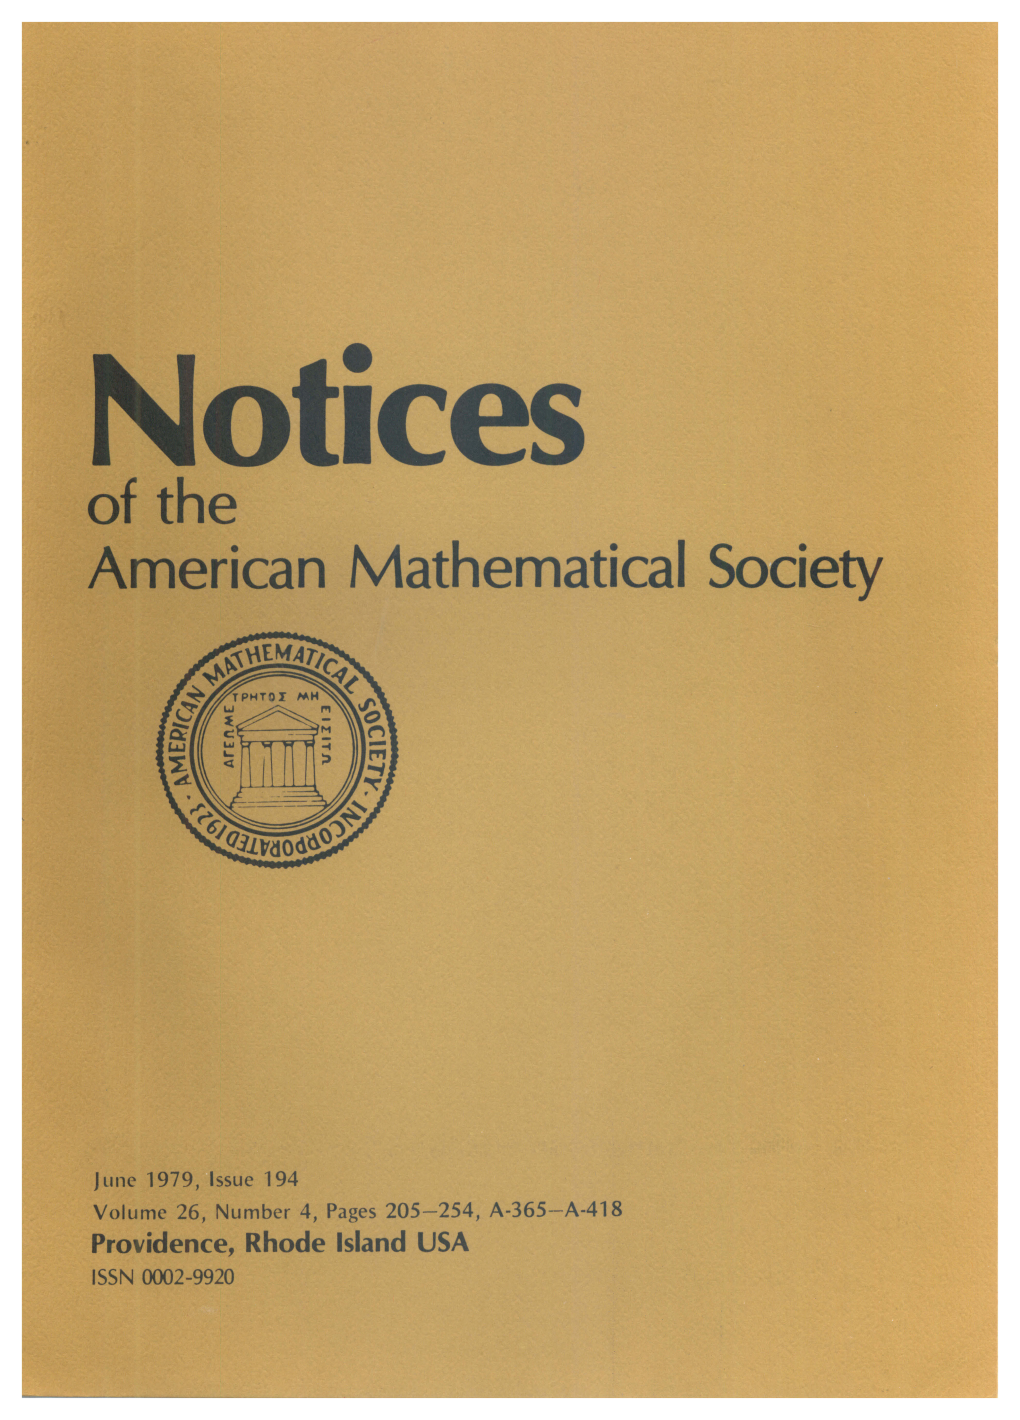 Notices of the American Mathematical Society